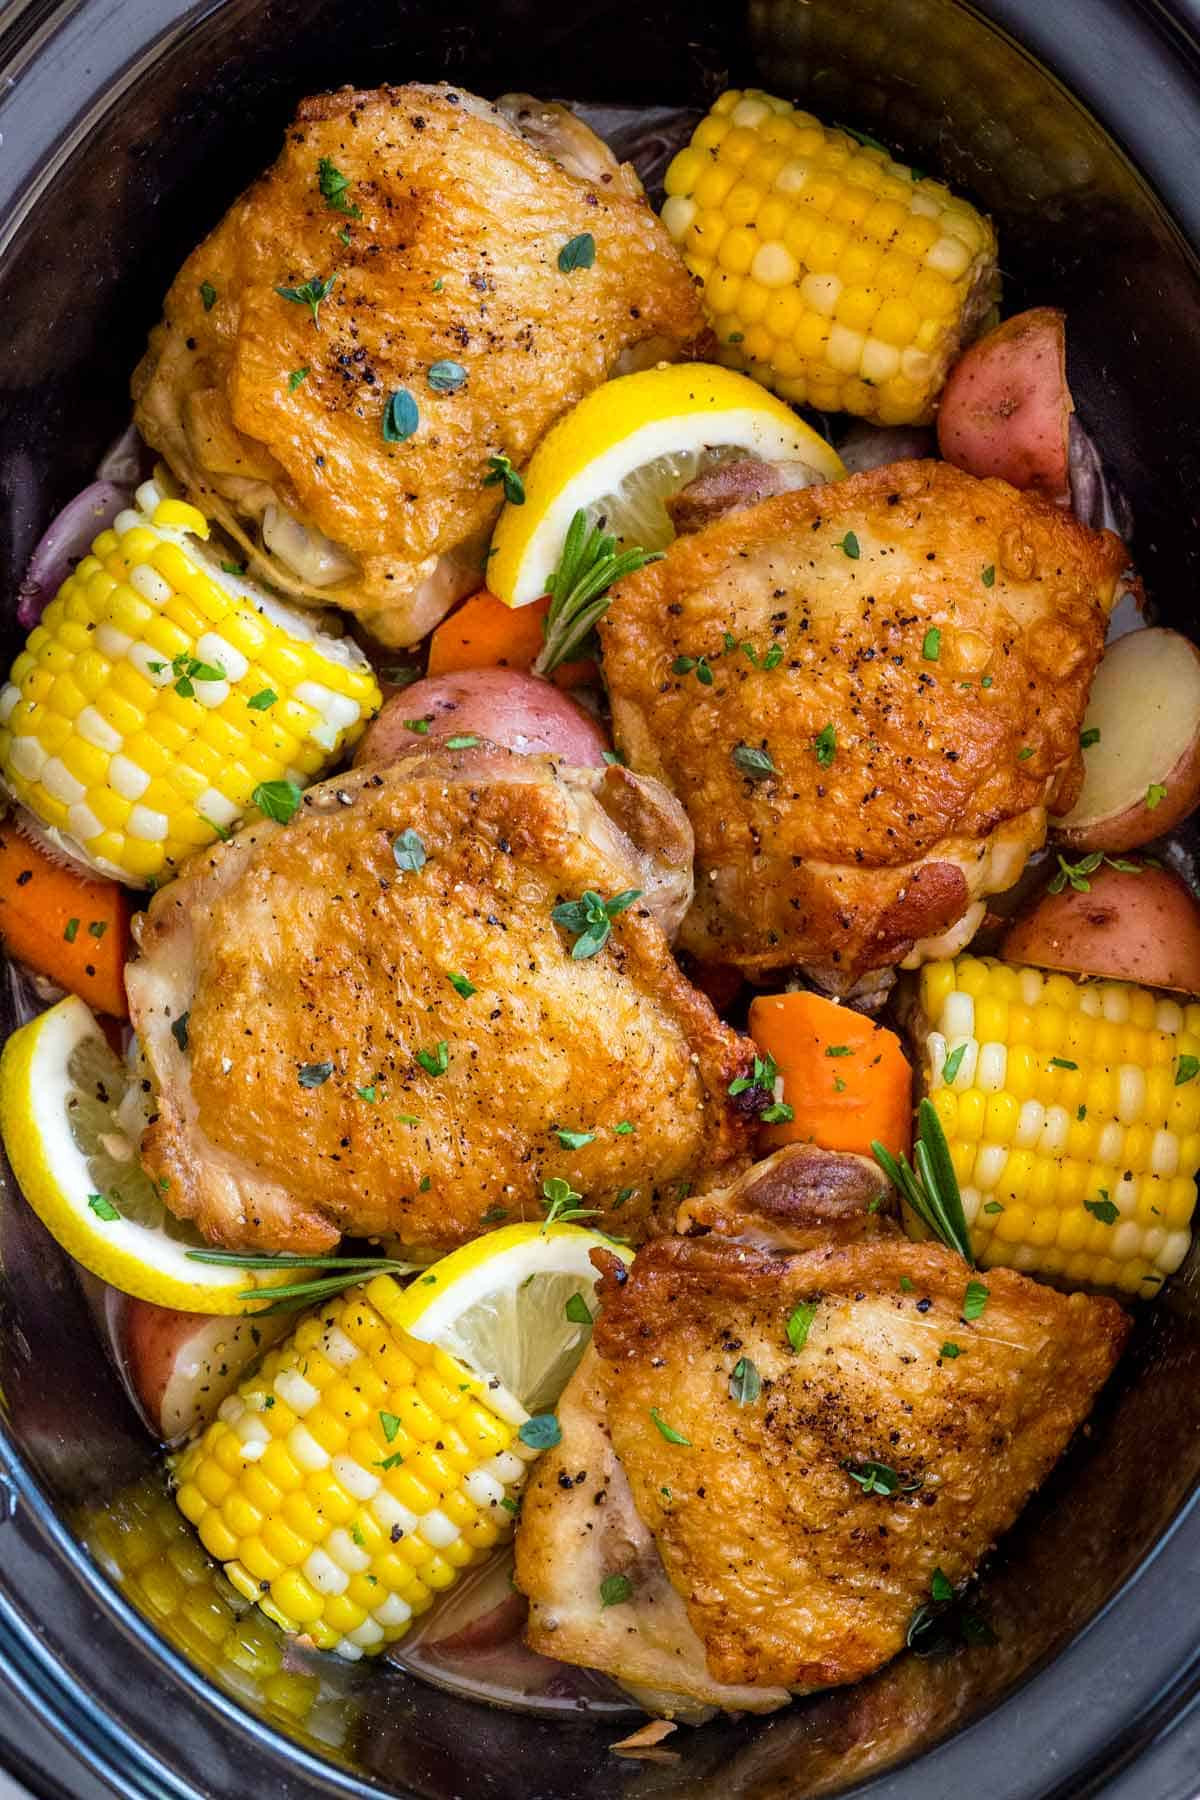 Slow Cook Chicken Thighs Inspirational Slow Cooker Chicken Thighs with Ve Ables Jessica Gavin